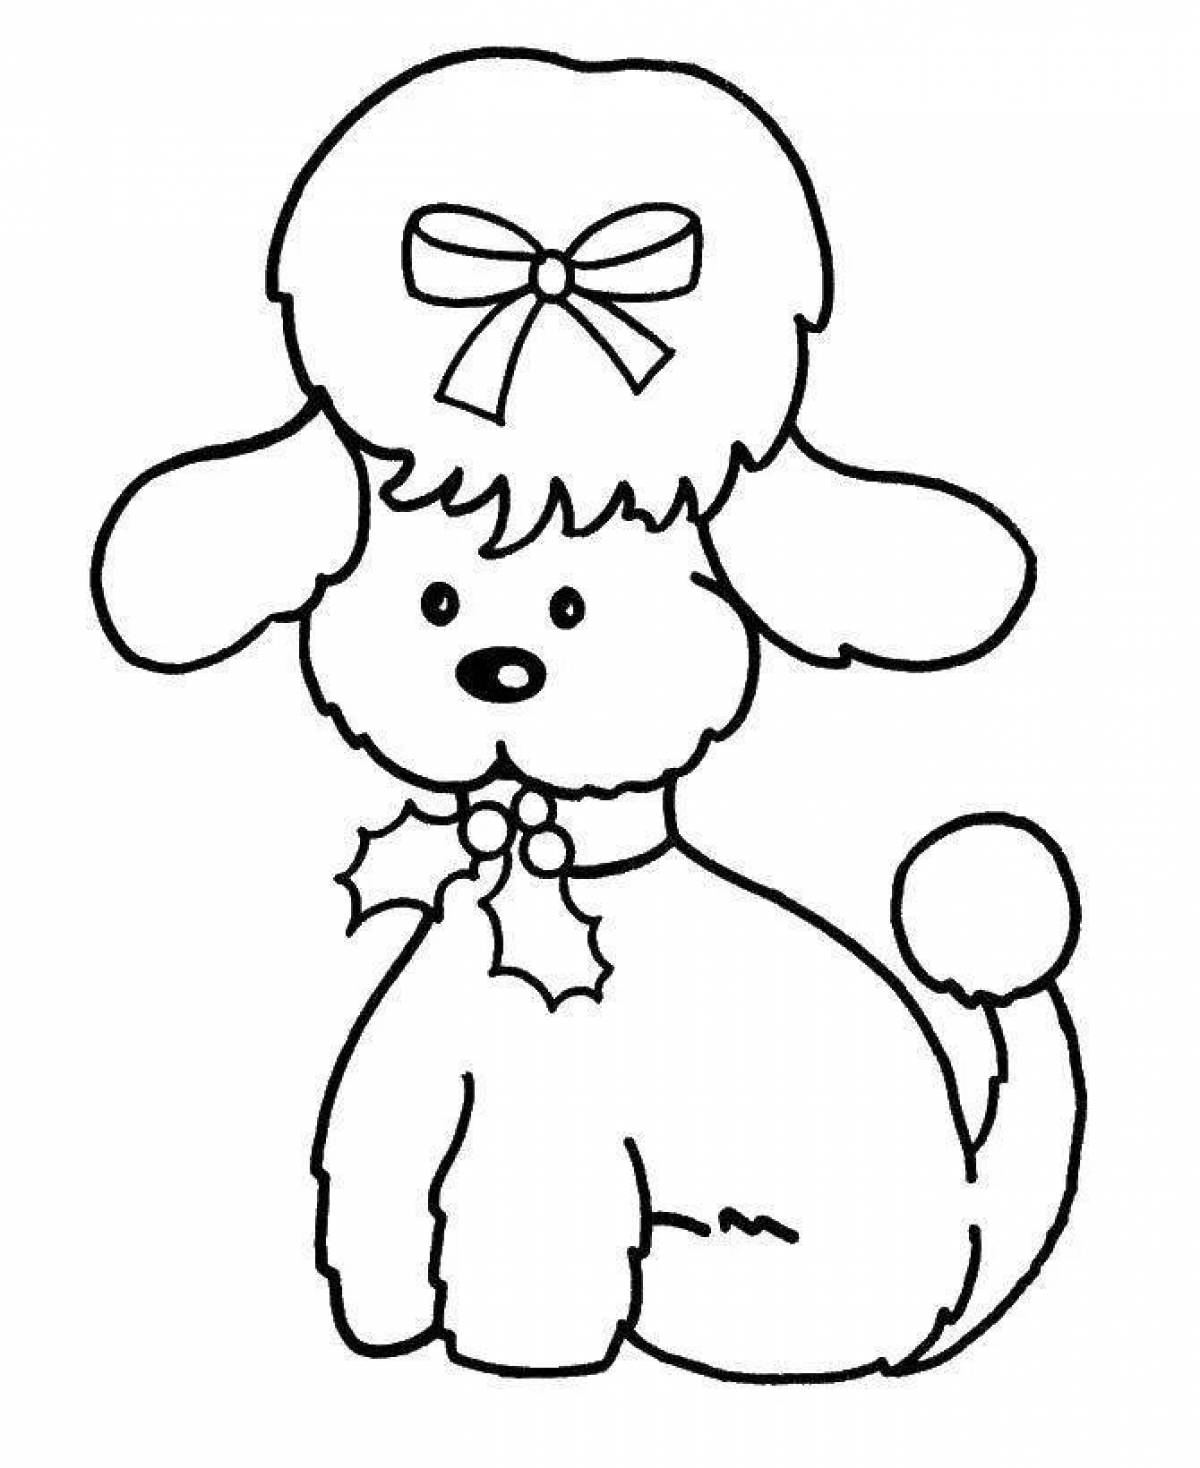 Disturbing coloring dog with a bow